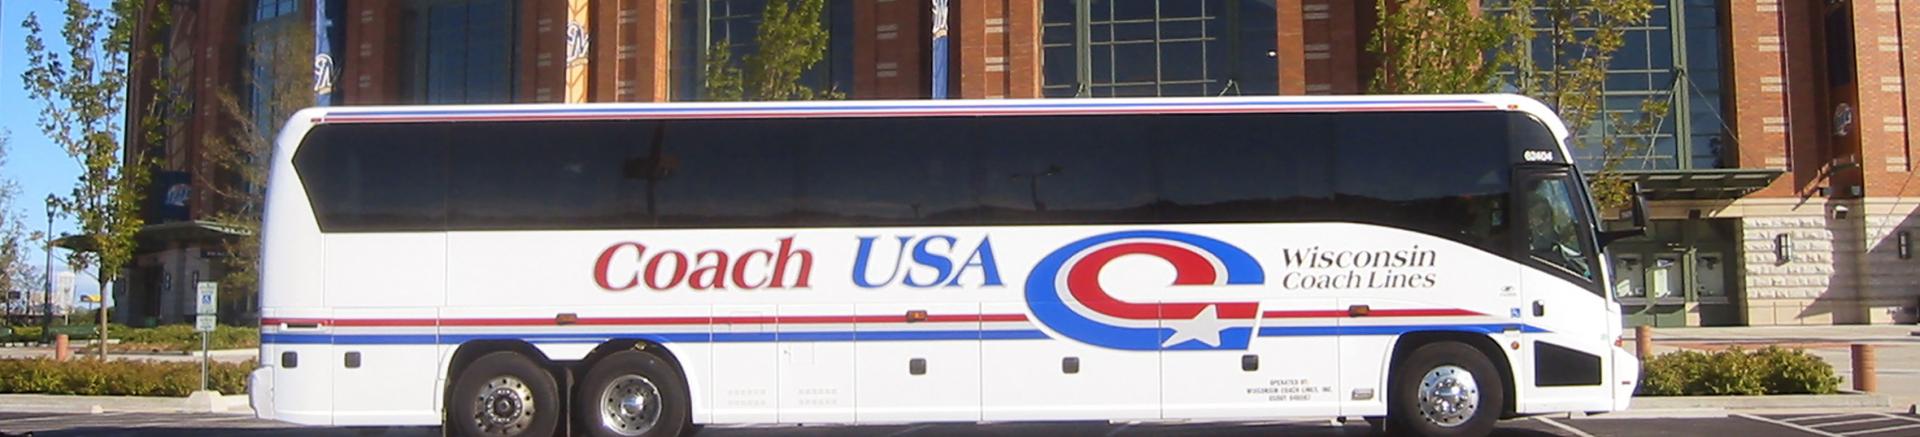 Wisconsin Coach Lines Commuter & Transit Routes | Coach USA